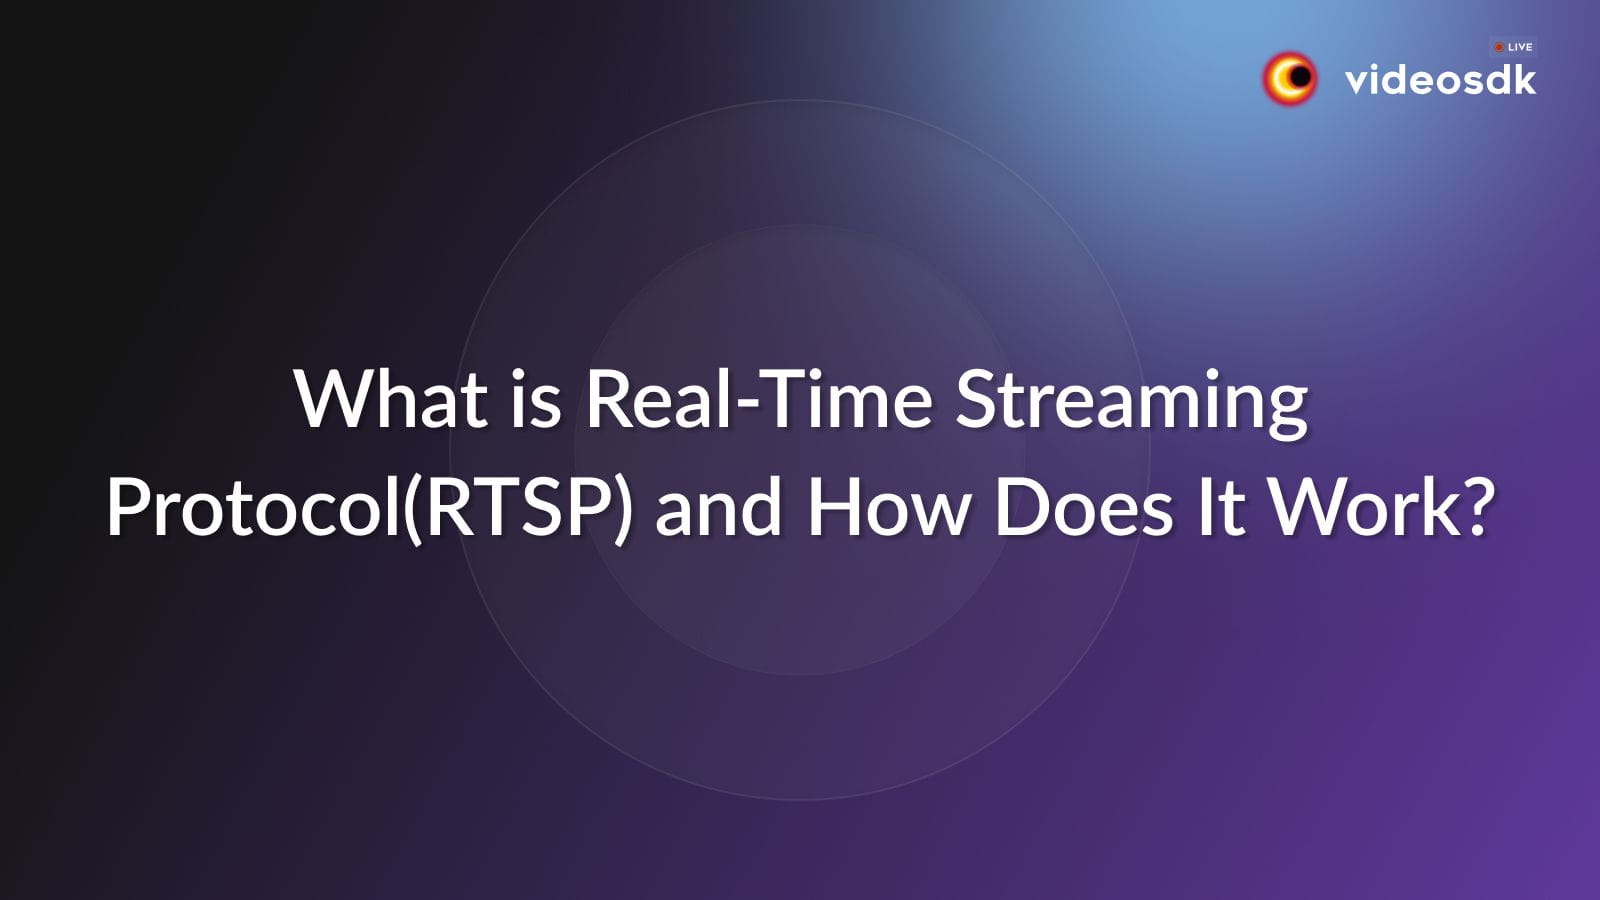 What is Real-Time Streaming Protocol(RTSP)?